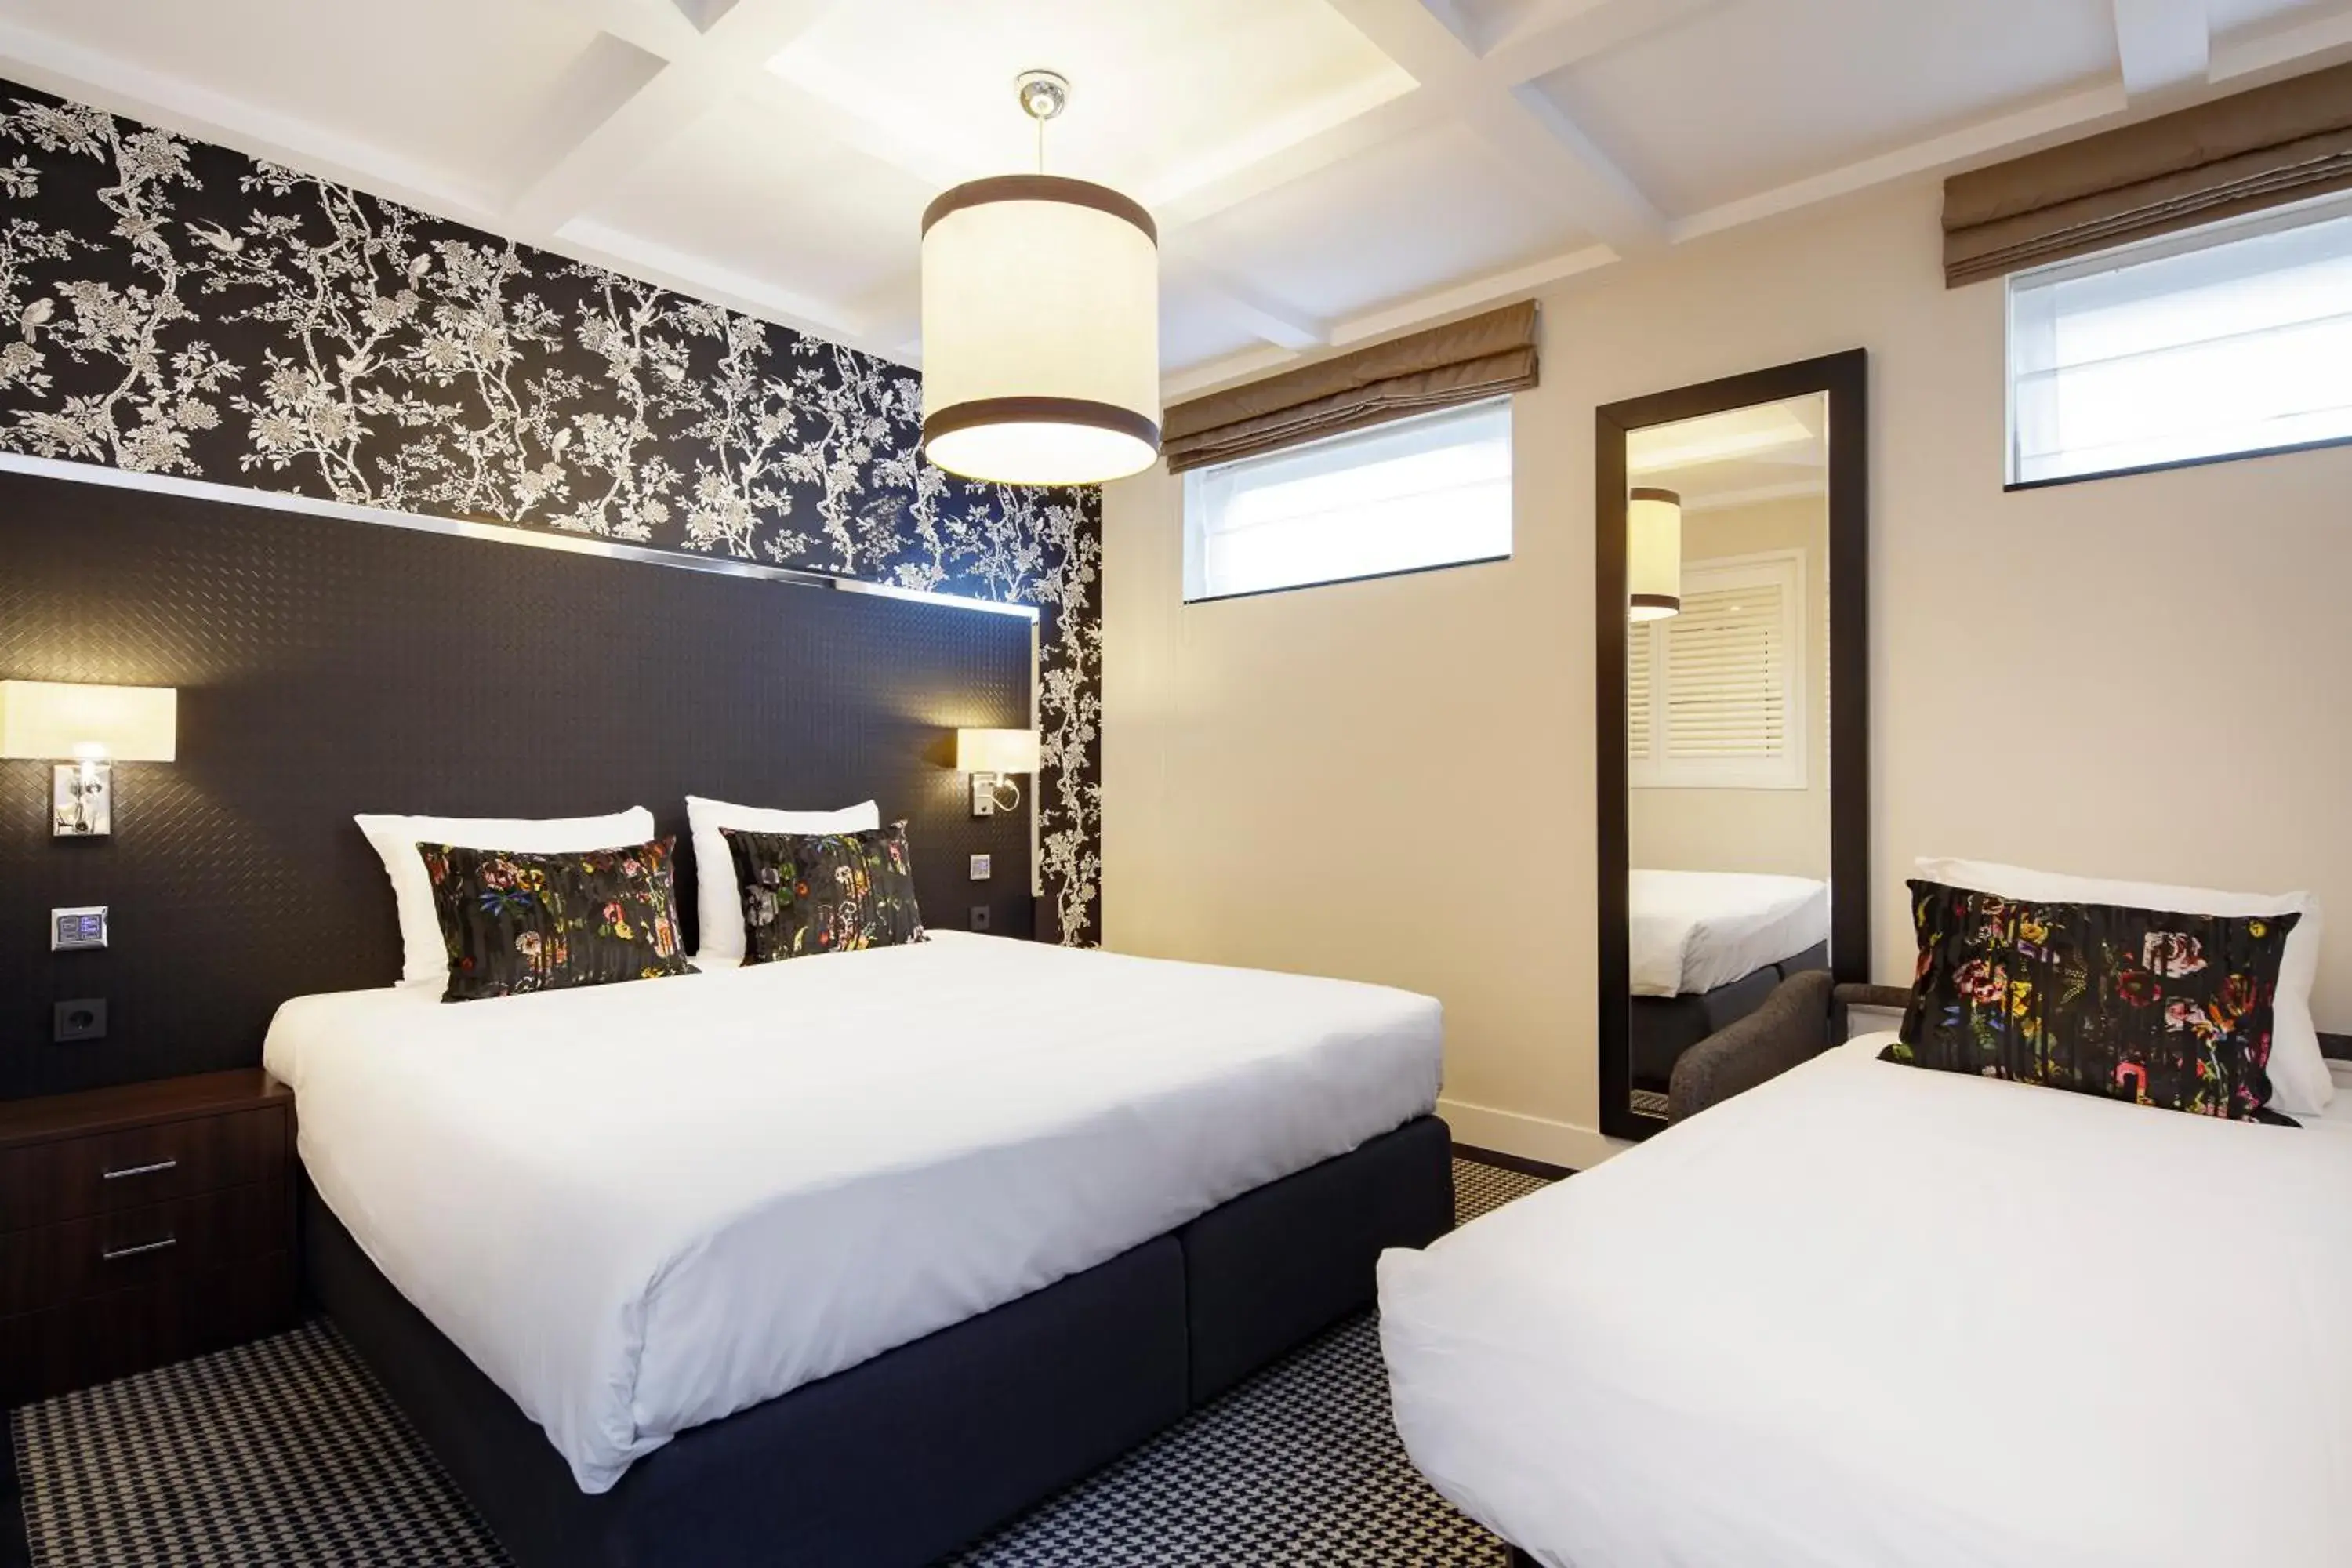 Souterrain Triple Room (Below Street Level with Limited View) in Boutique Hotel Notting Hill